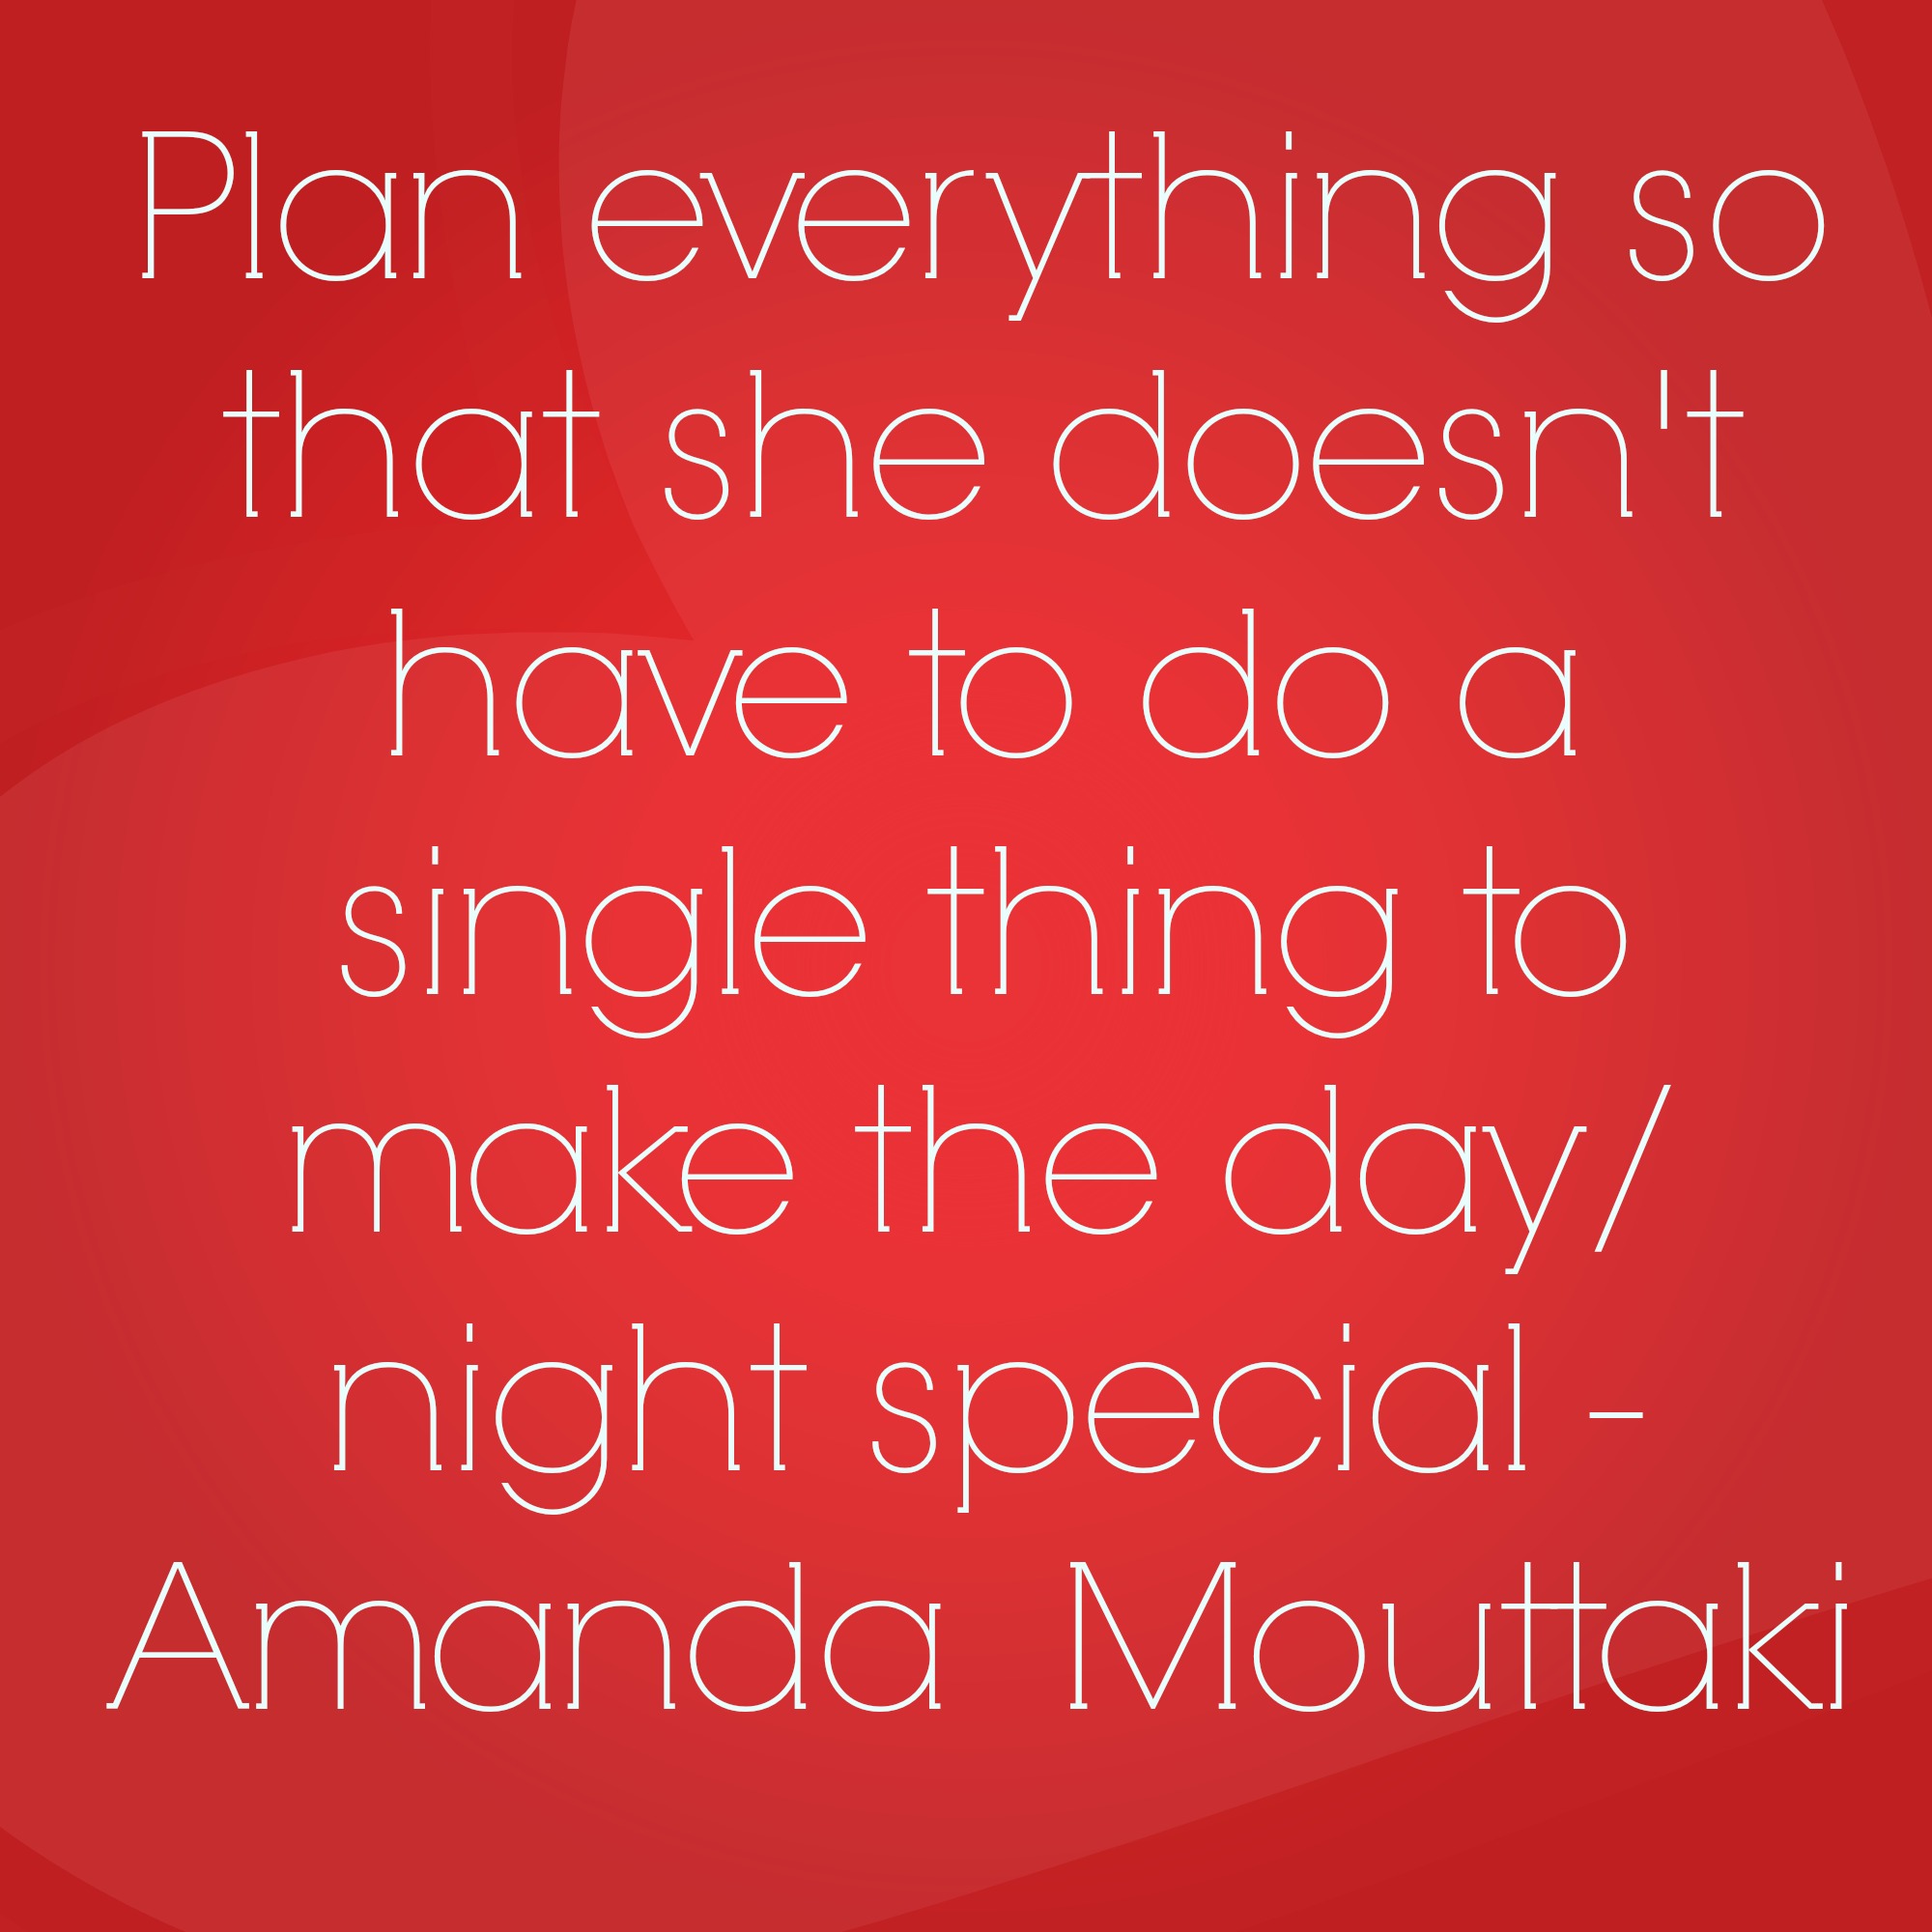 Plan everything so that she doesn't have to do a single thing to make the day/night special.